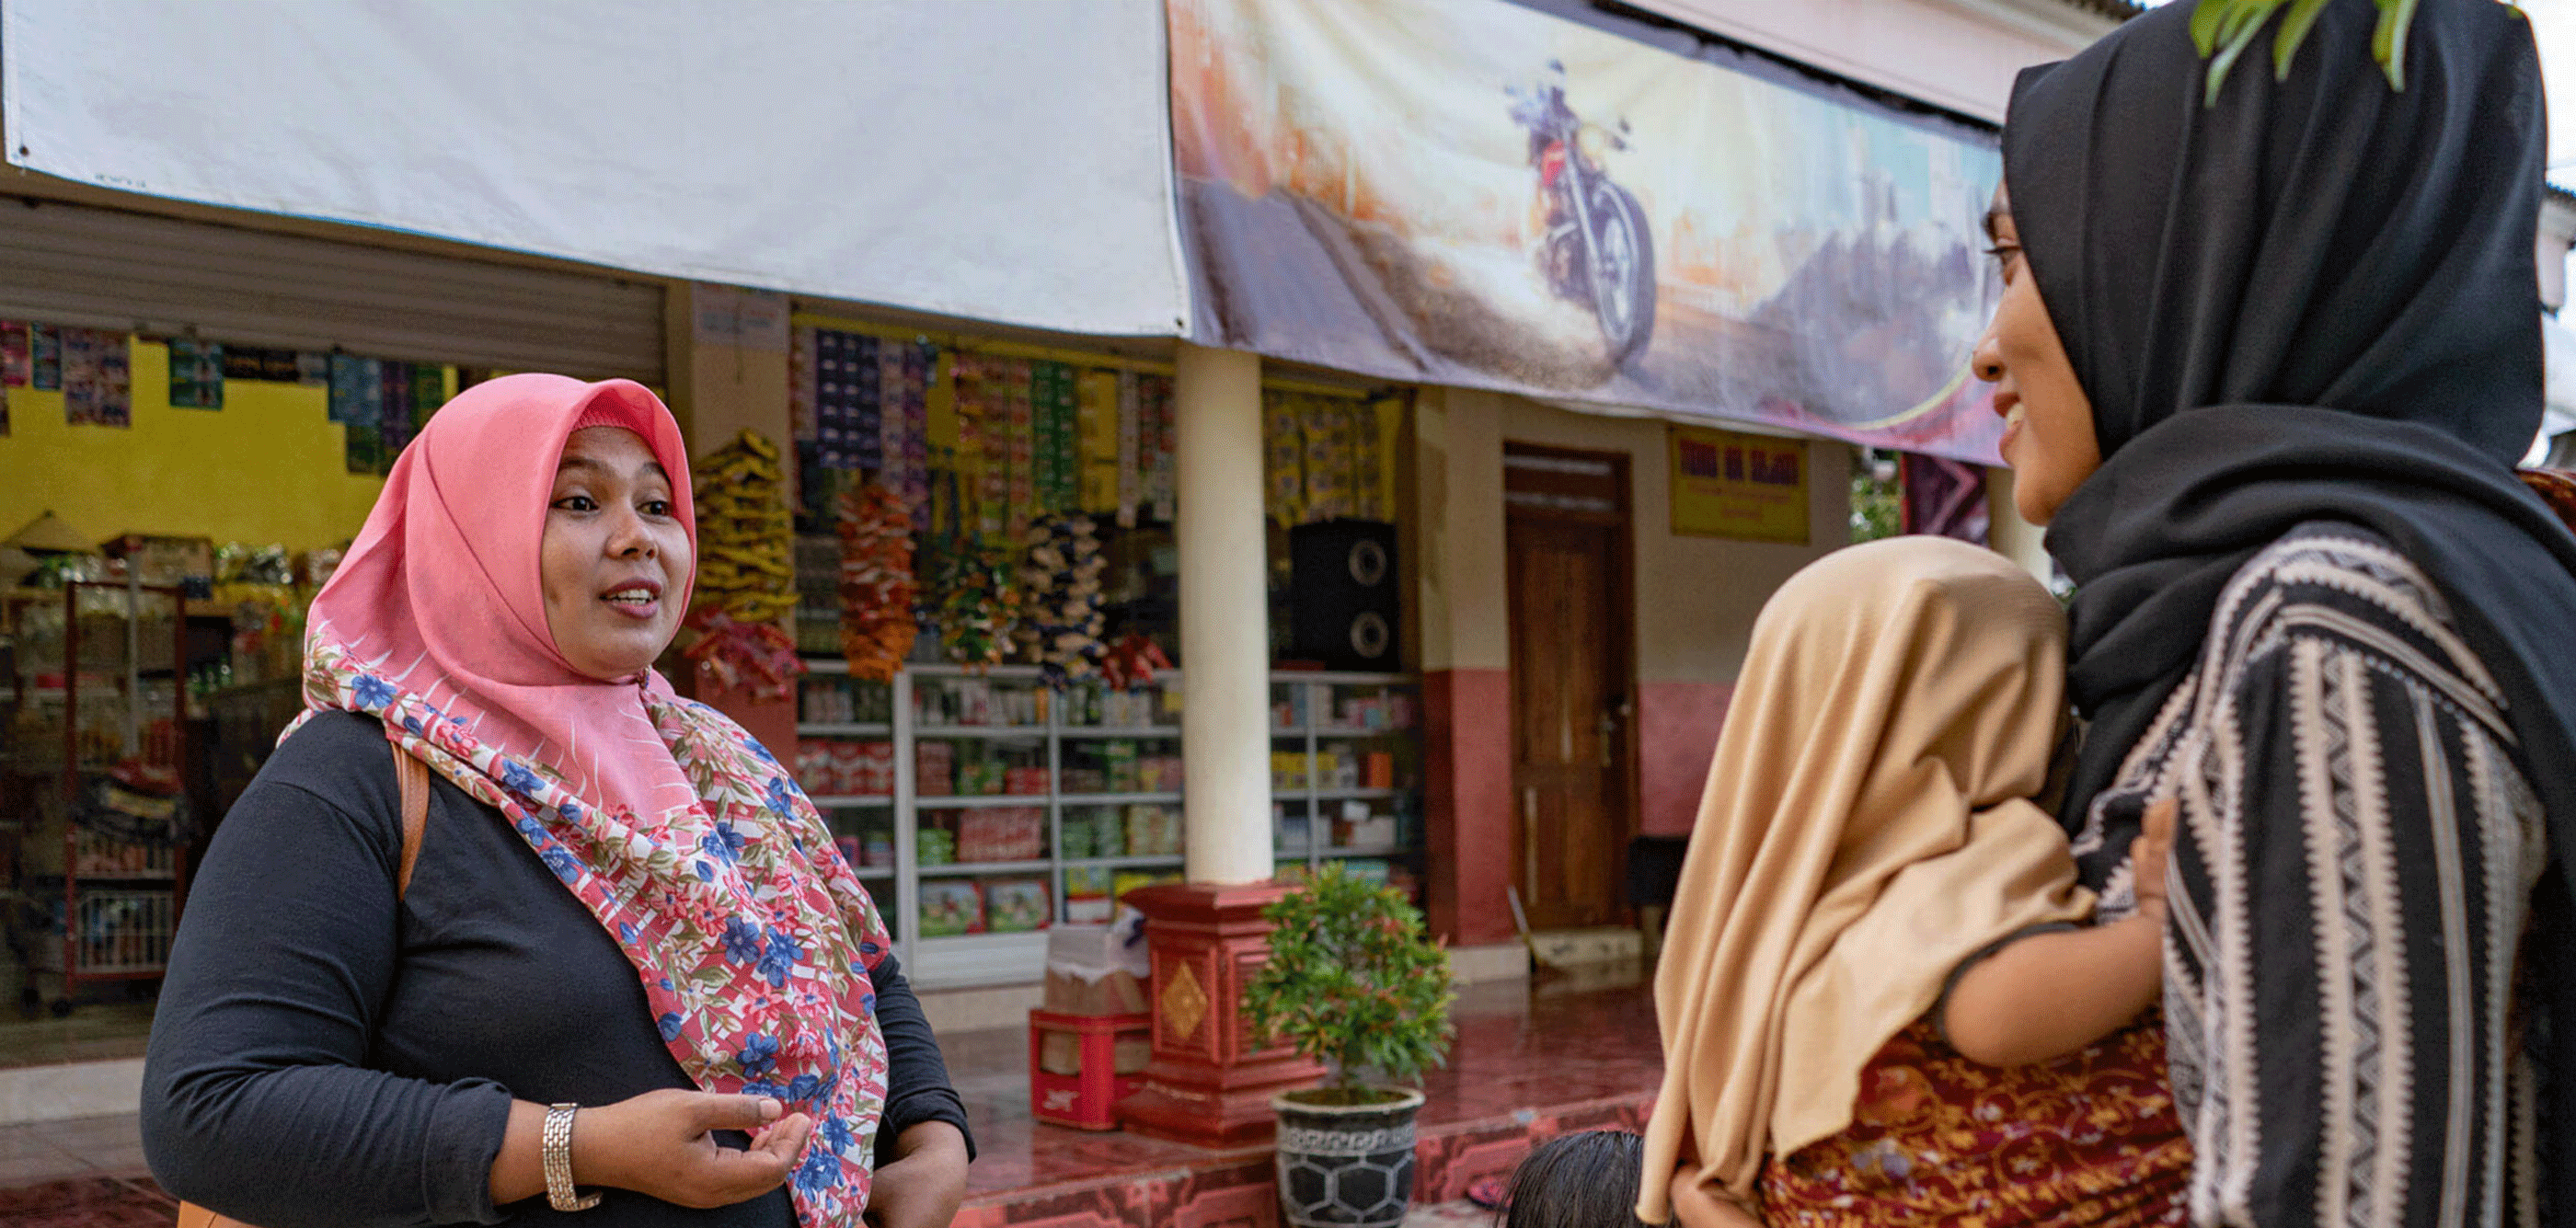 Side view of two women with headscarf, in fromt of a shop in indonedia. one woman is one carrying a baby